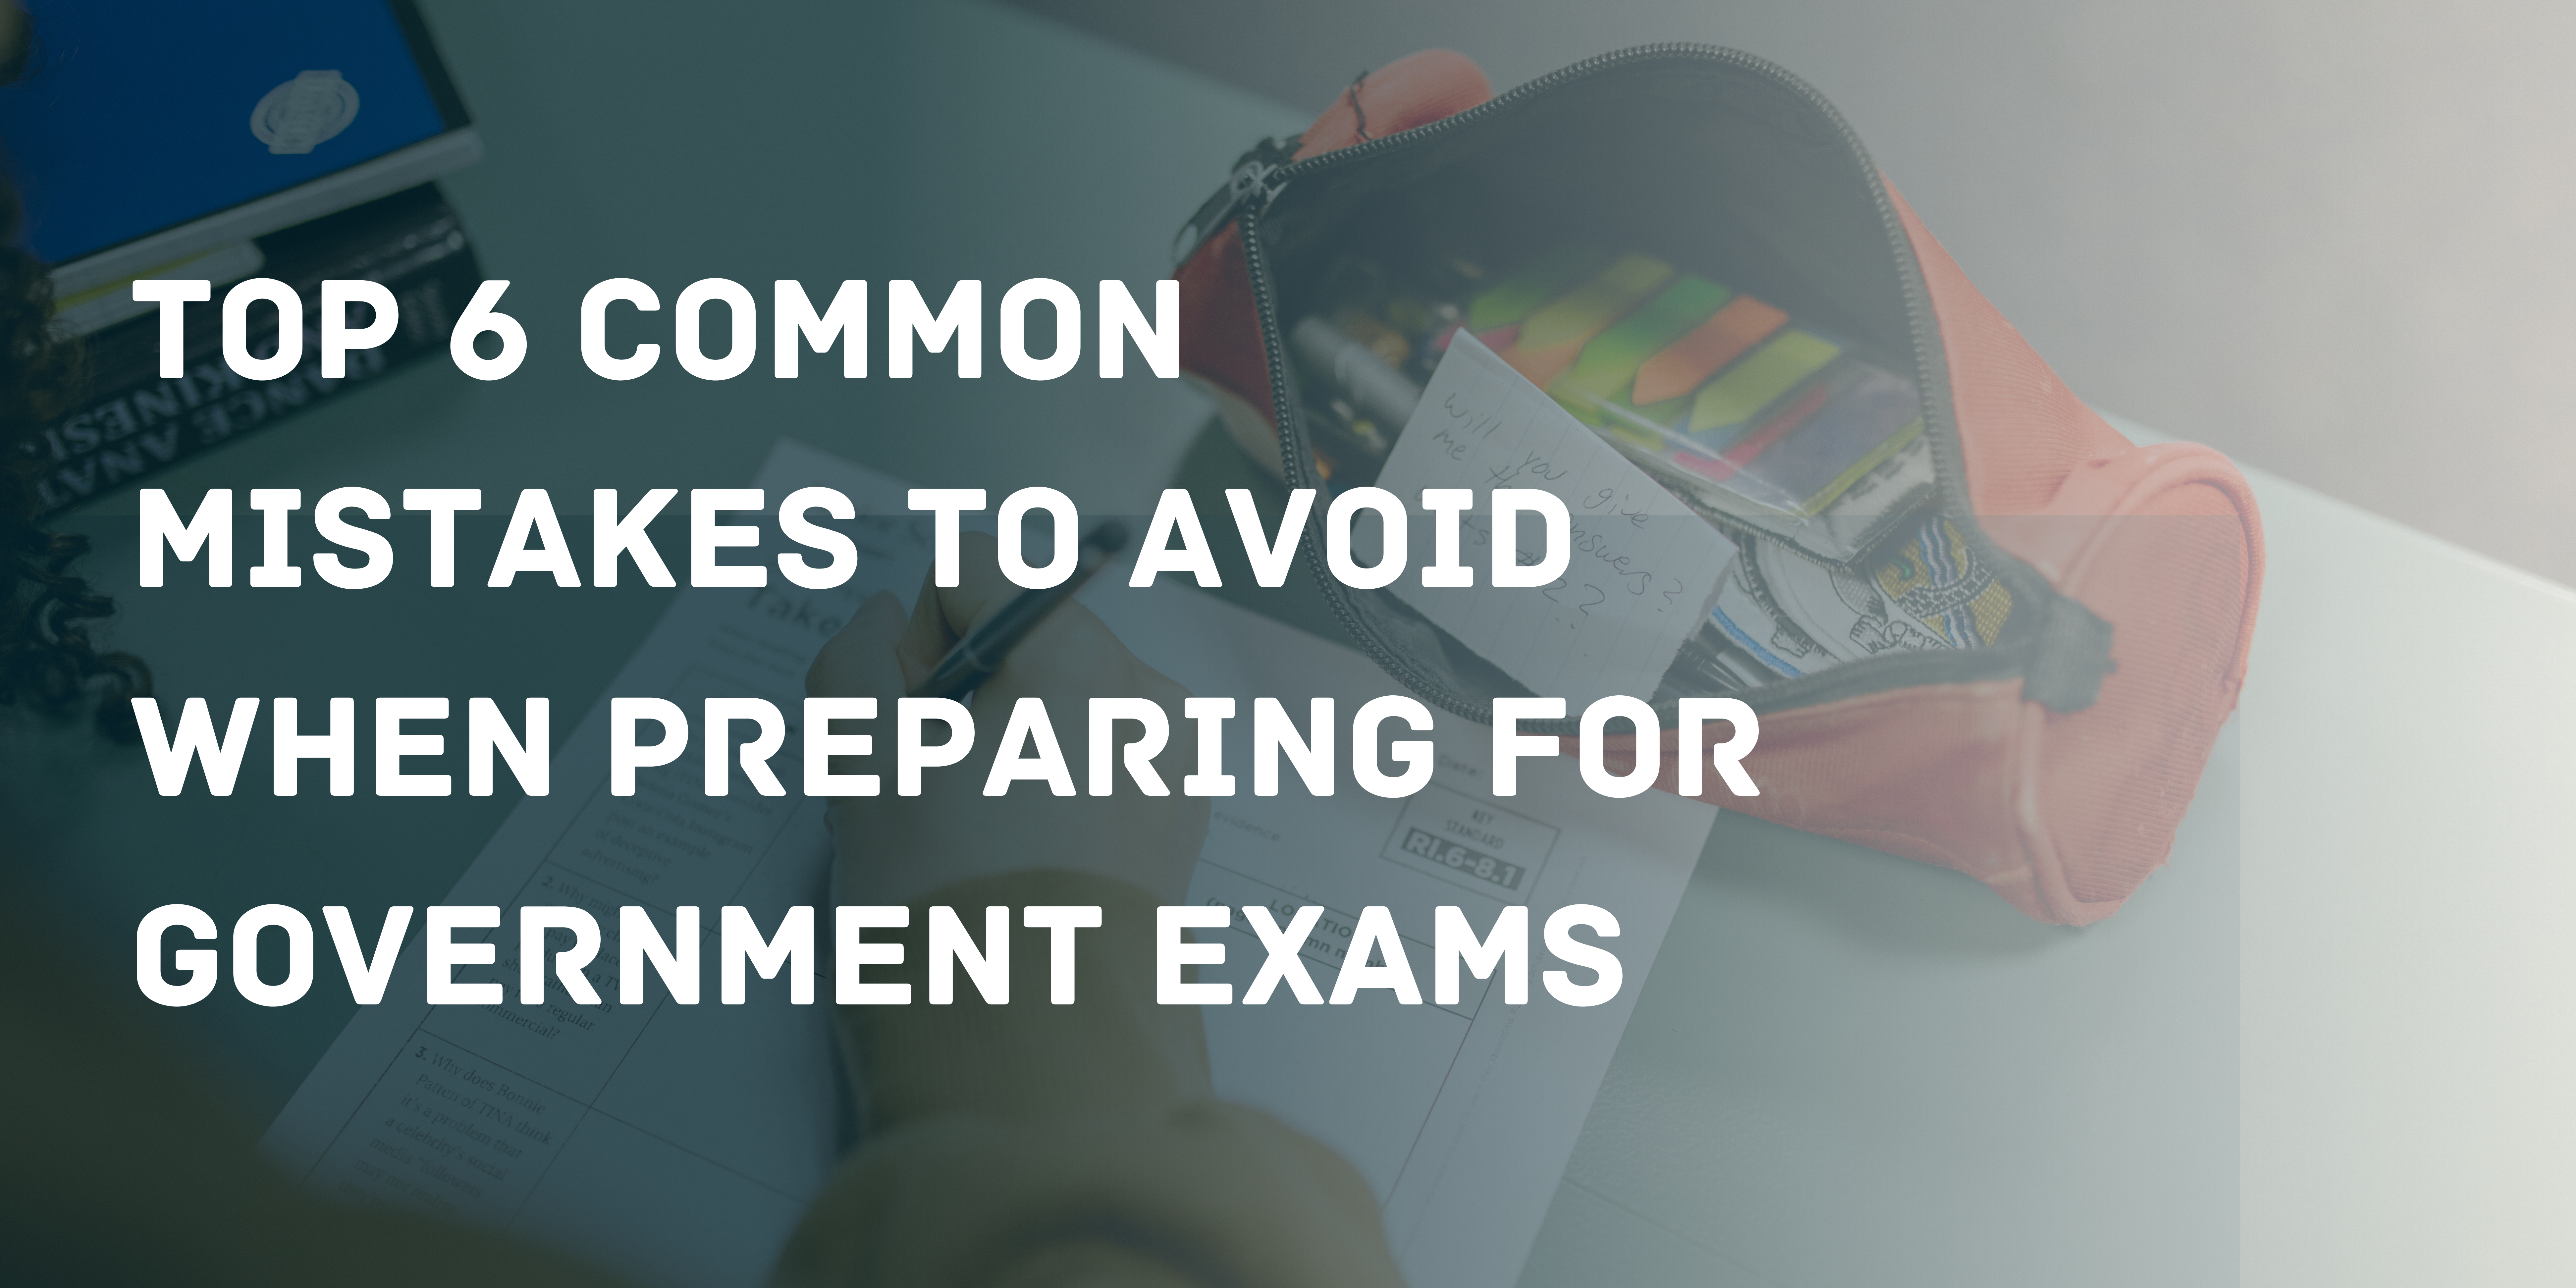 Top 6 common mistakes to avoid when preparing for government exams